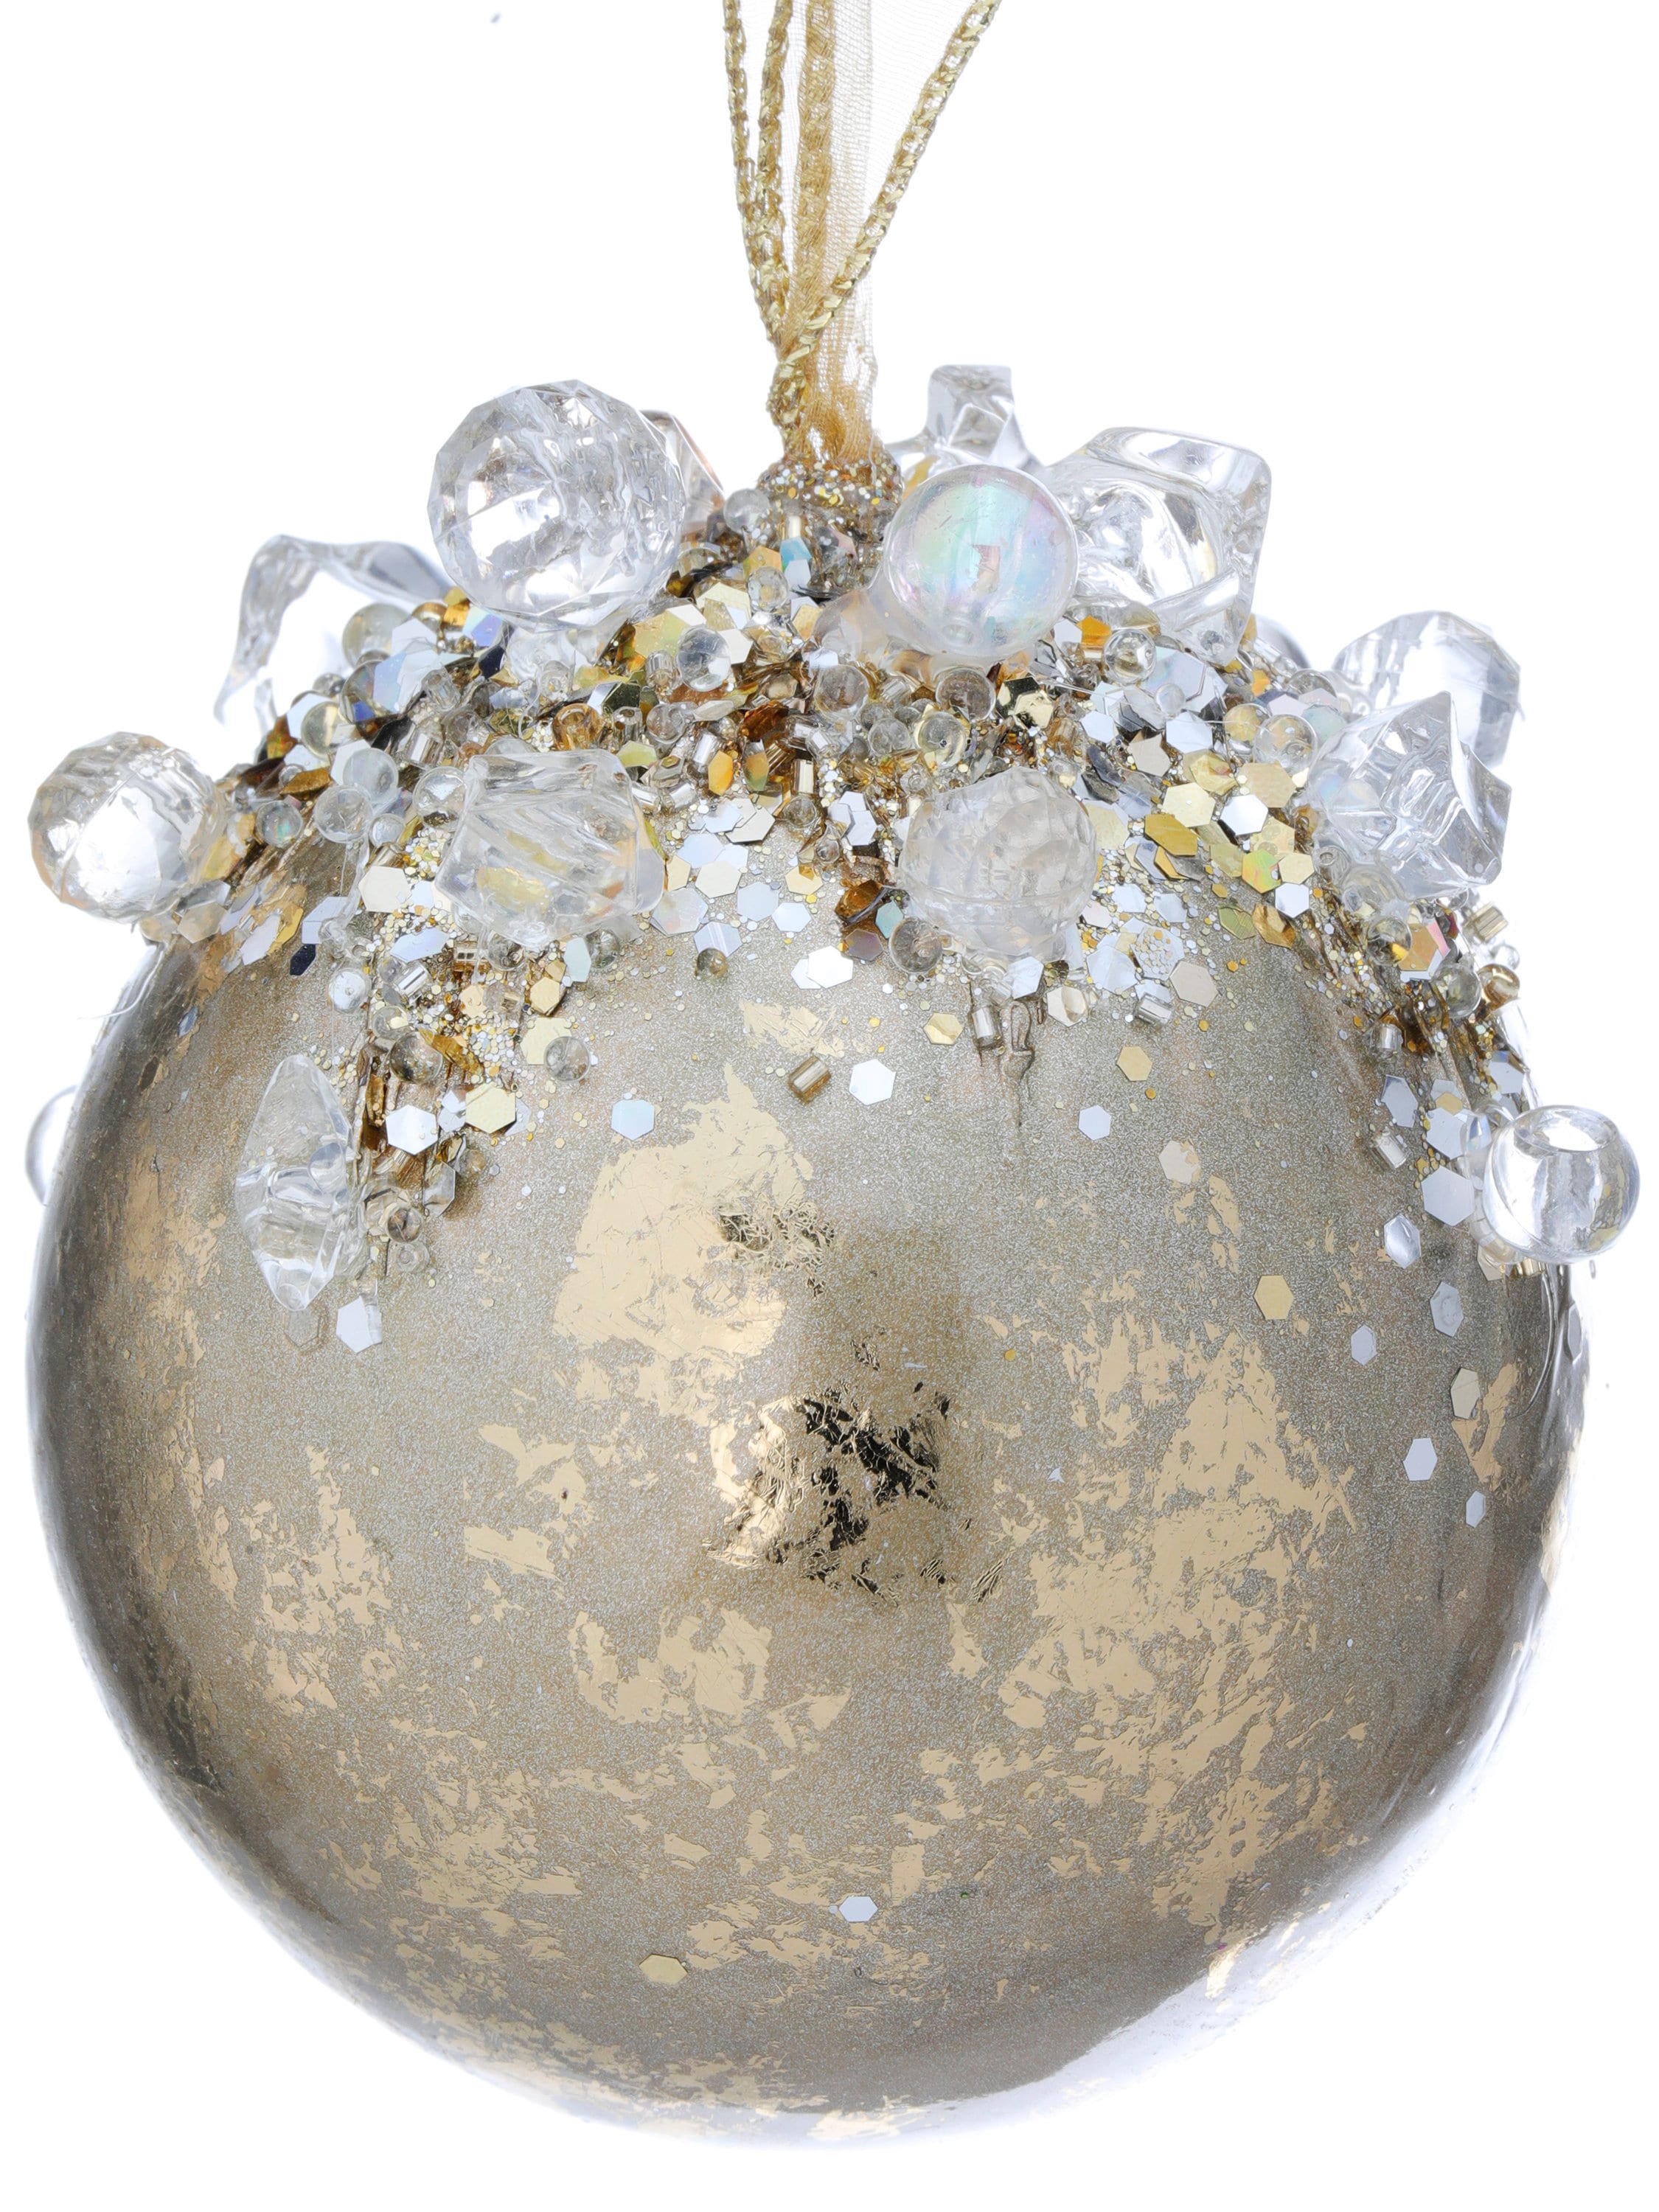 Gold Heavy Jeweled Ornament Ball 4 in., Gold Christmas Tree Ornament, Gold Wreath Attachment, Gold Christmas Decorations